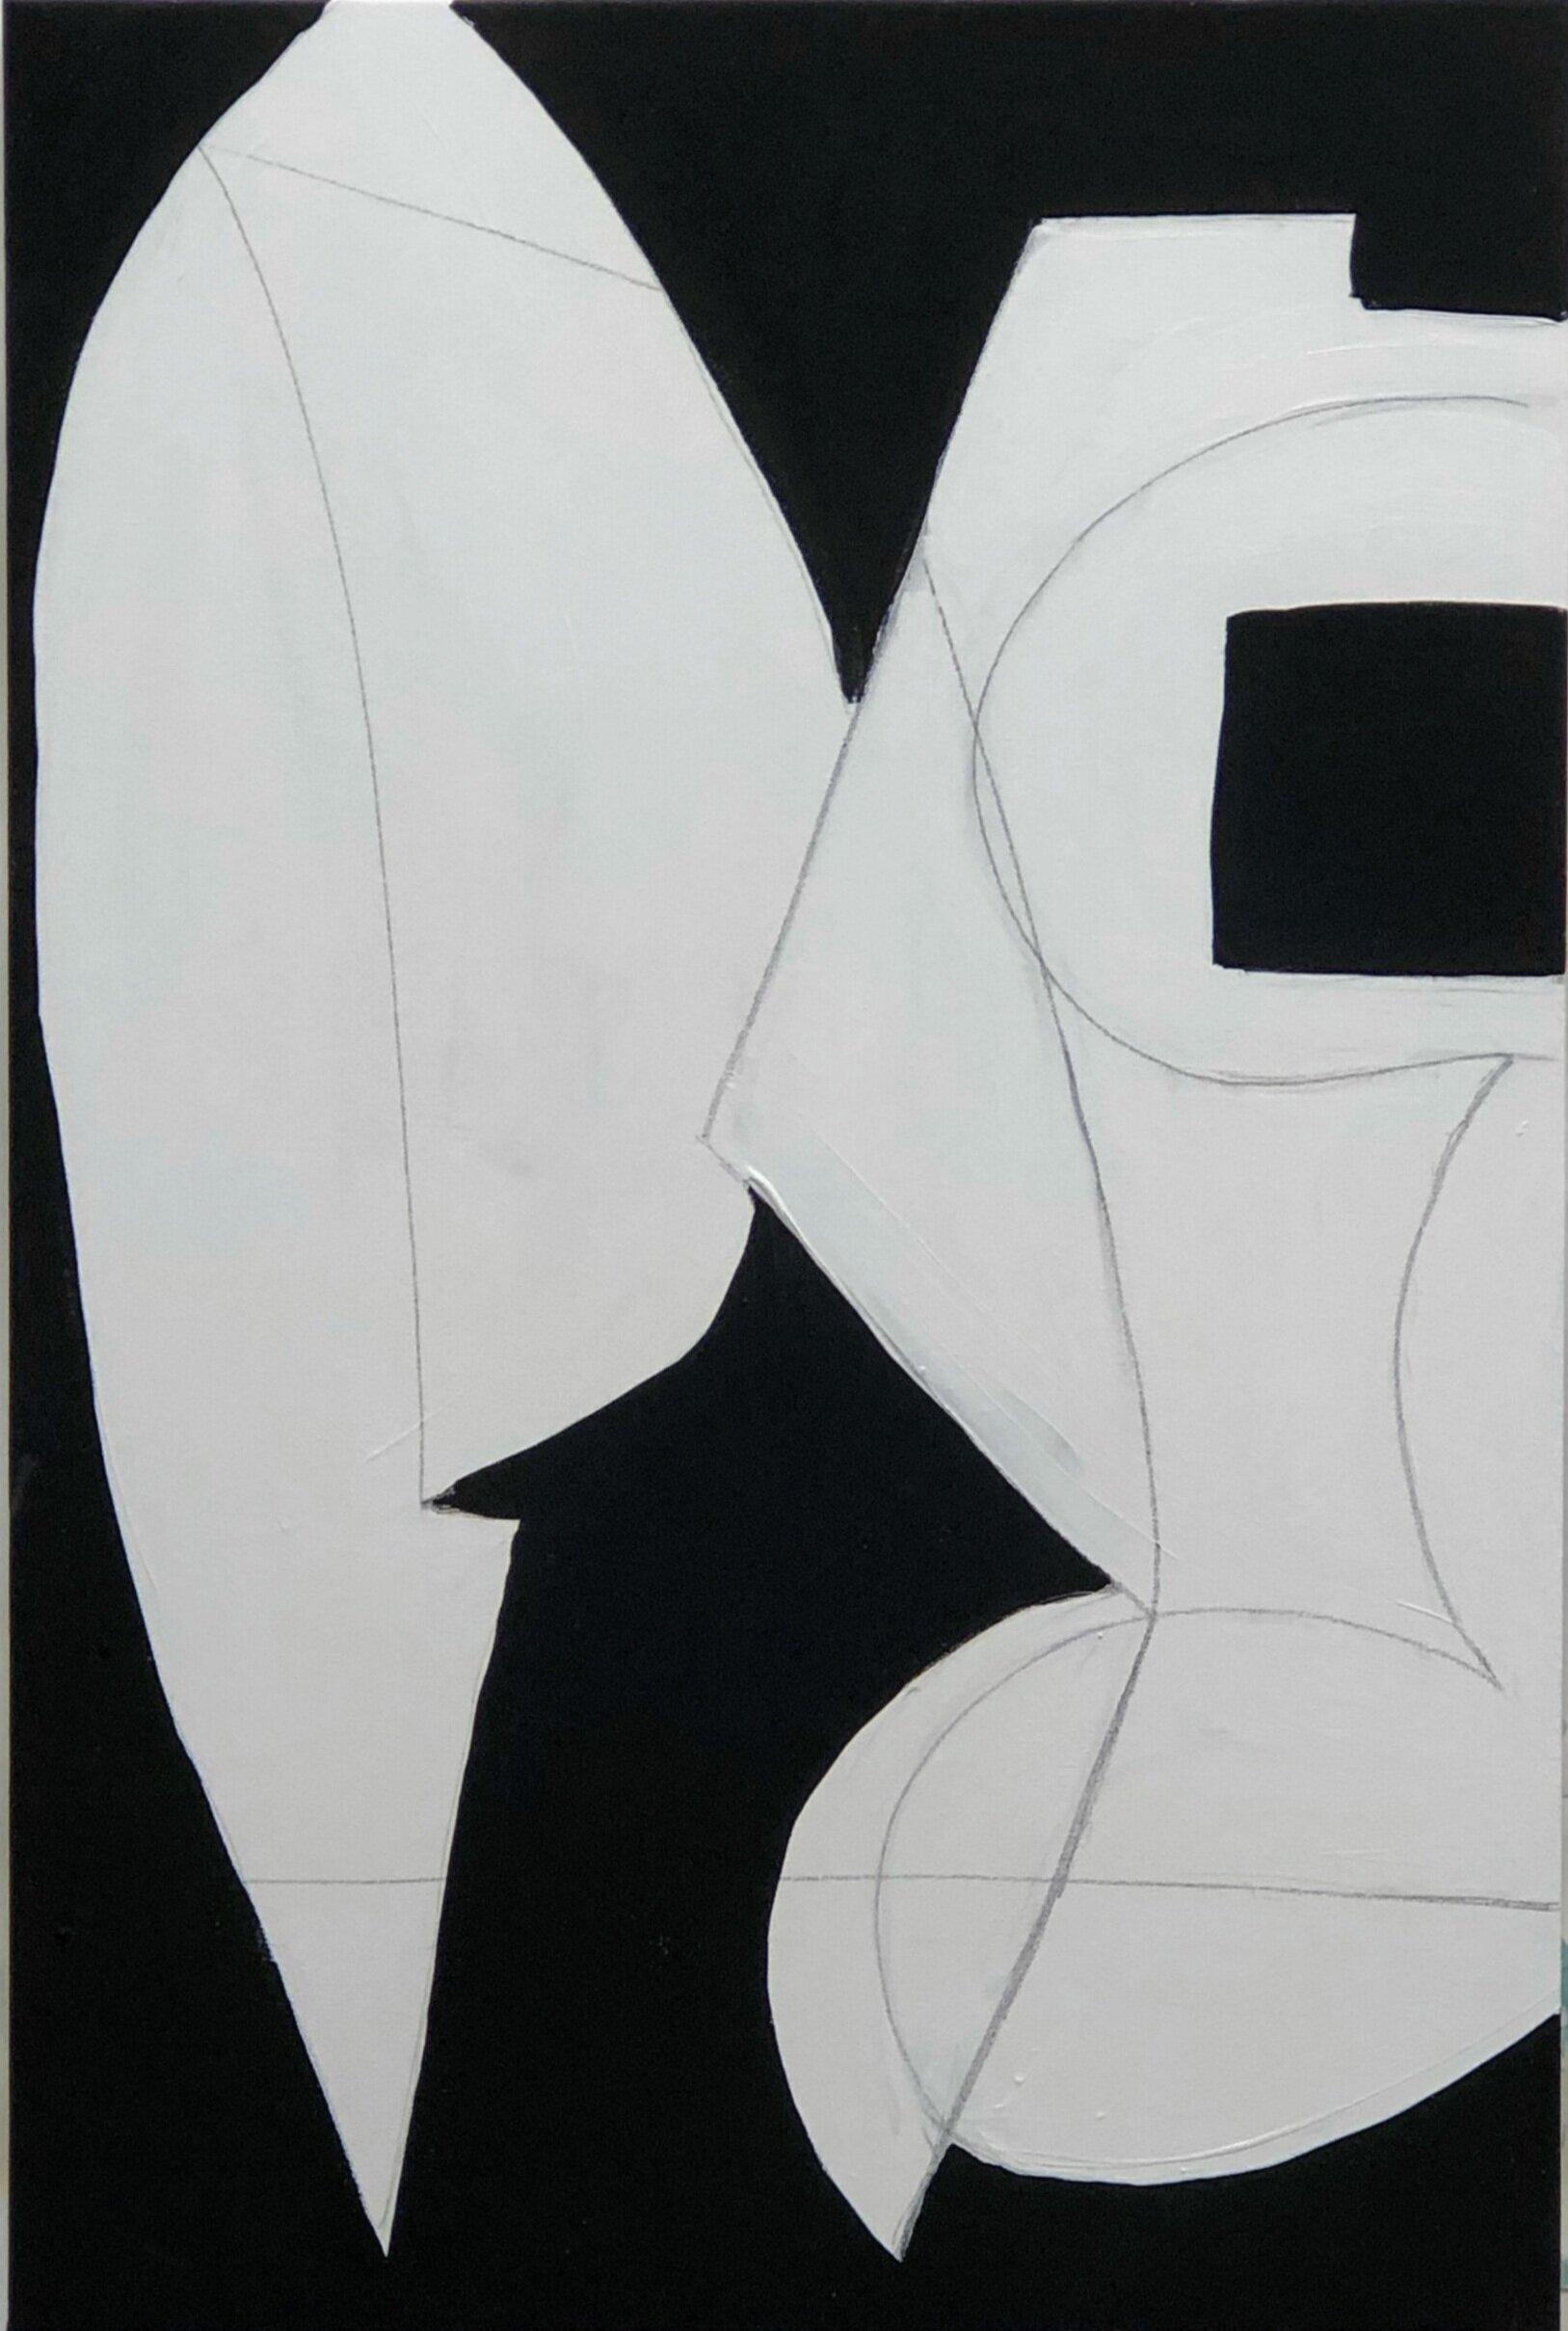 Black & White #3, 2020, acrylic on canvas, 36 x 24 in,  $3000